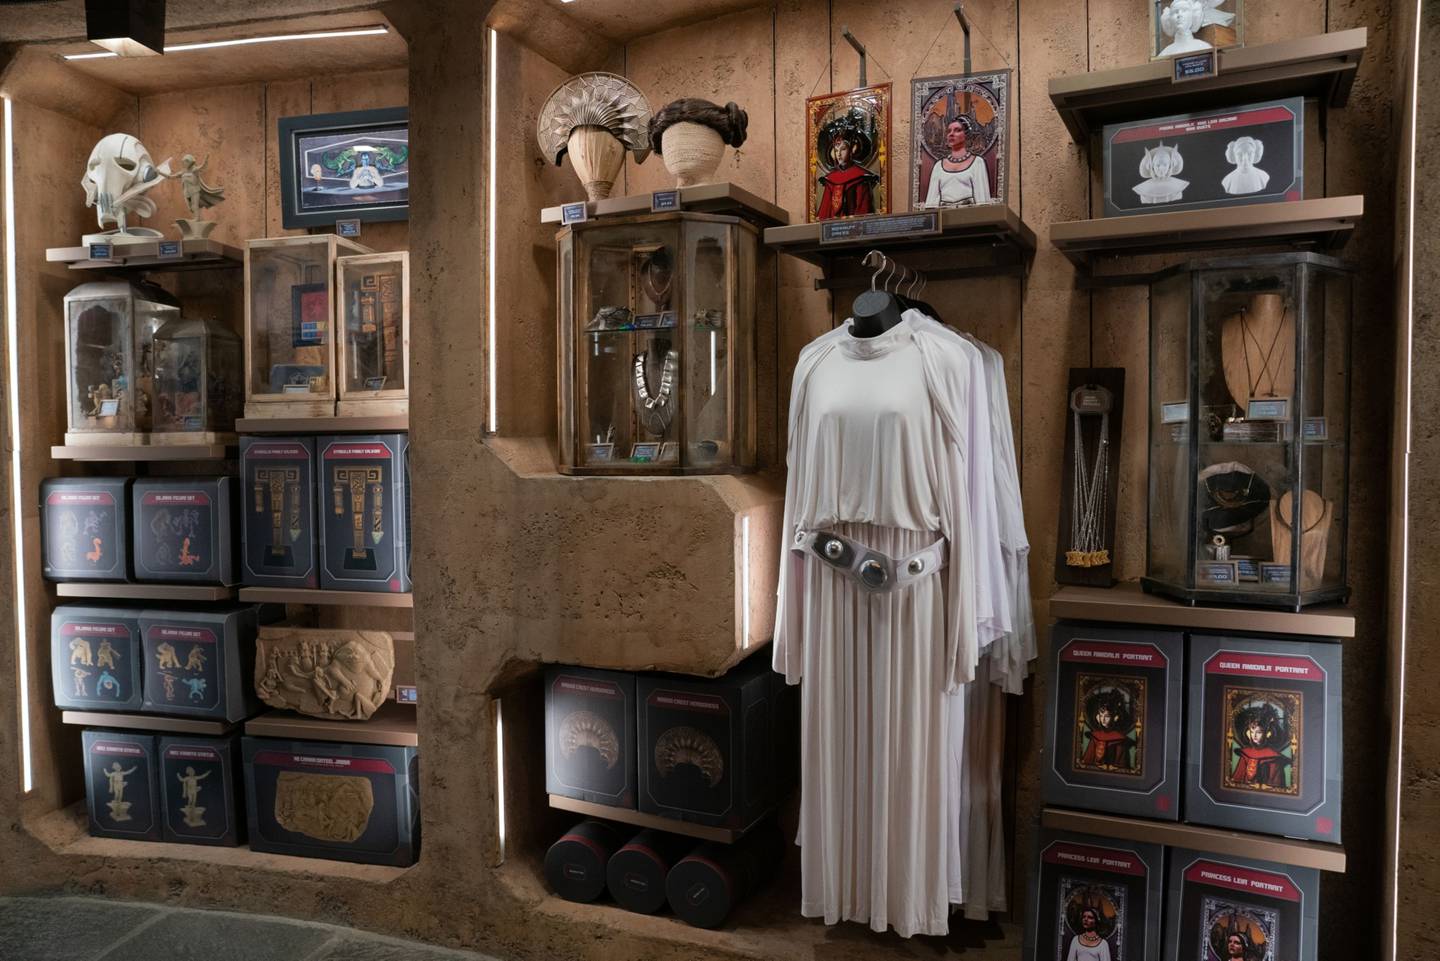 Star Wars merchandise for sale inside a gift shop in the Star Wars: Galaxy's Edge themed area during the reopening of the Disneyland theme park in Anaheim, California, U.S., on Friday, April 30, 2021. Walt Disney Co.s original Disneyland resort in California is sold out for weekends through May, an indication of pent-up demand for leisure activities as the pandemic eases in the nations most-populous state. Photographer: Bing Guan/Bloombergdfd